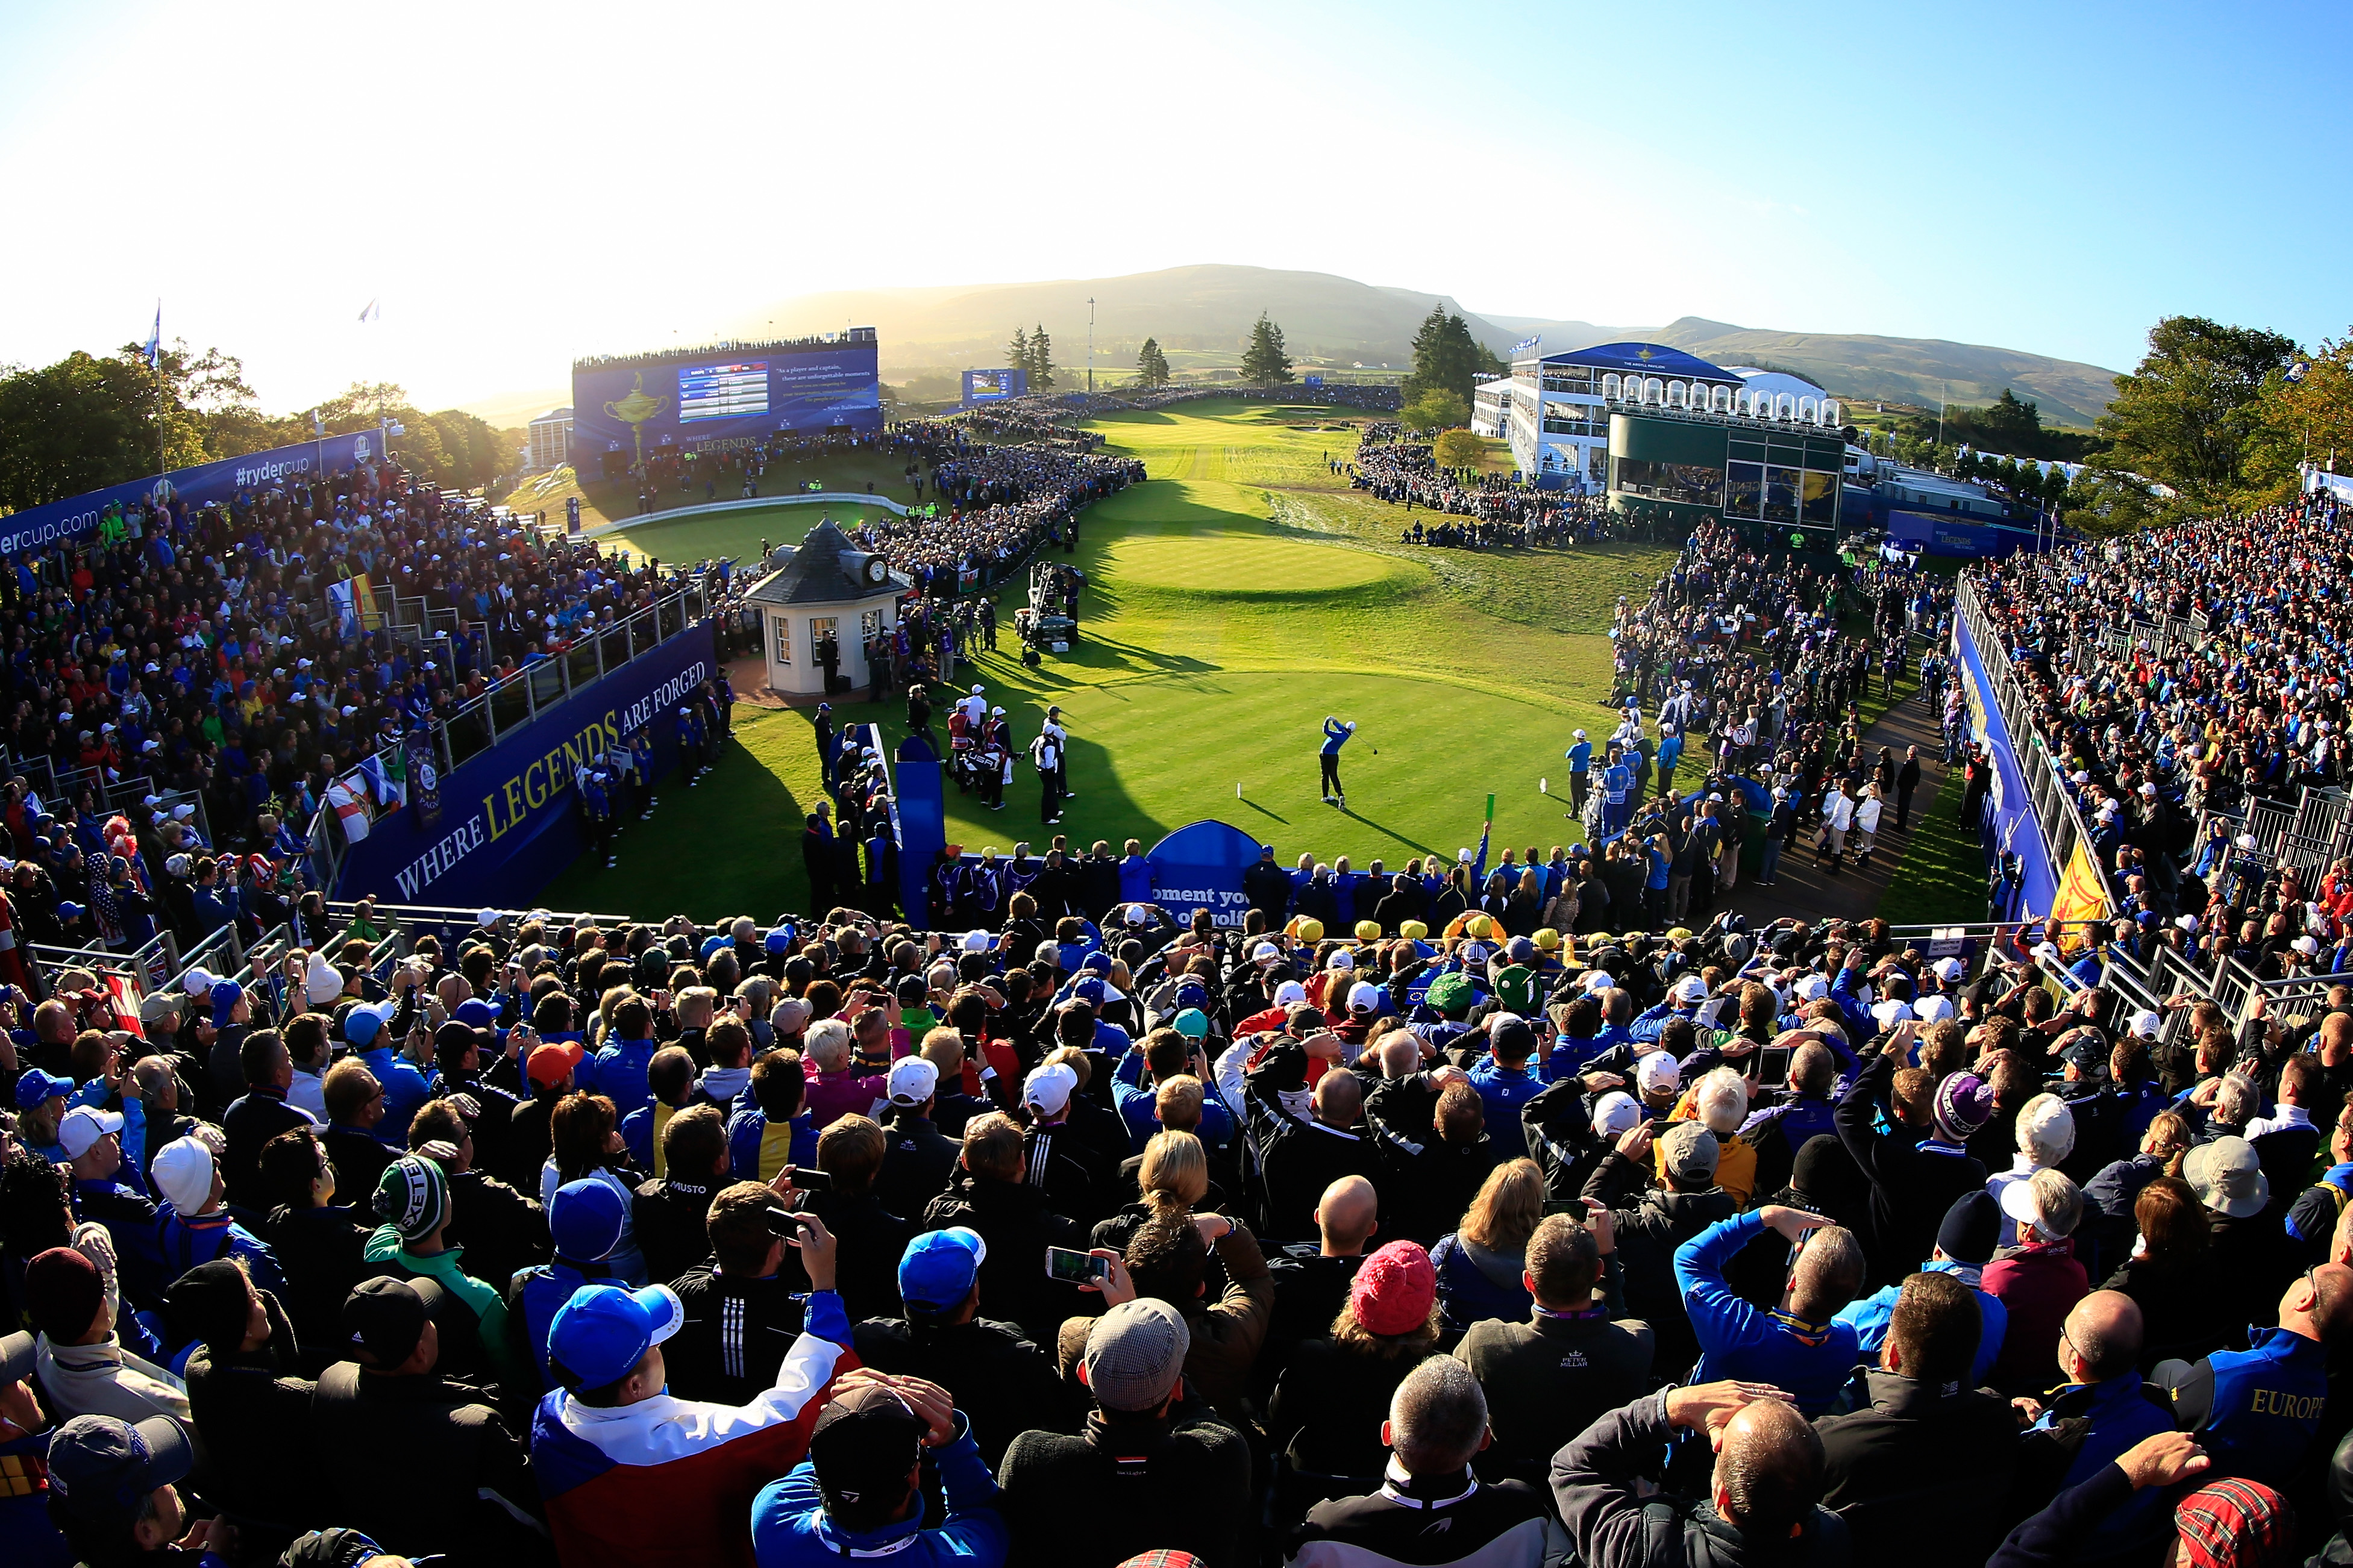 AUCHTERARDER, SCOTLAND - SEPTEMBER 26: Rory McIlroy of Europe hits his tee shot on the 1st hole during the Morning Fourballs of the 2014 Ryder Cup on the PGA Centenary course at the Gleneagles Hotel on September 26, 2014 in Auchterarder, Scotland. (Photo by Harry How/Getty Images)